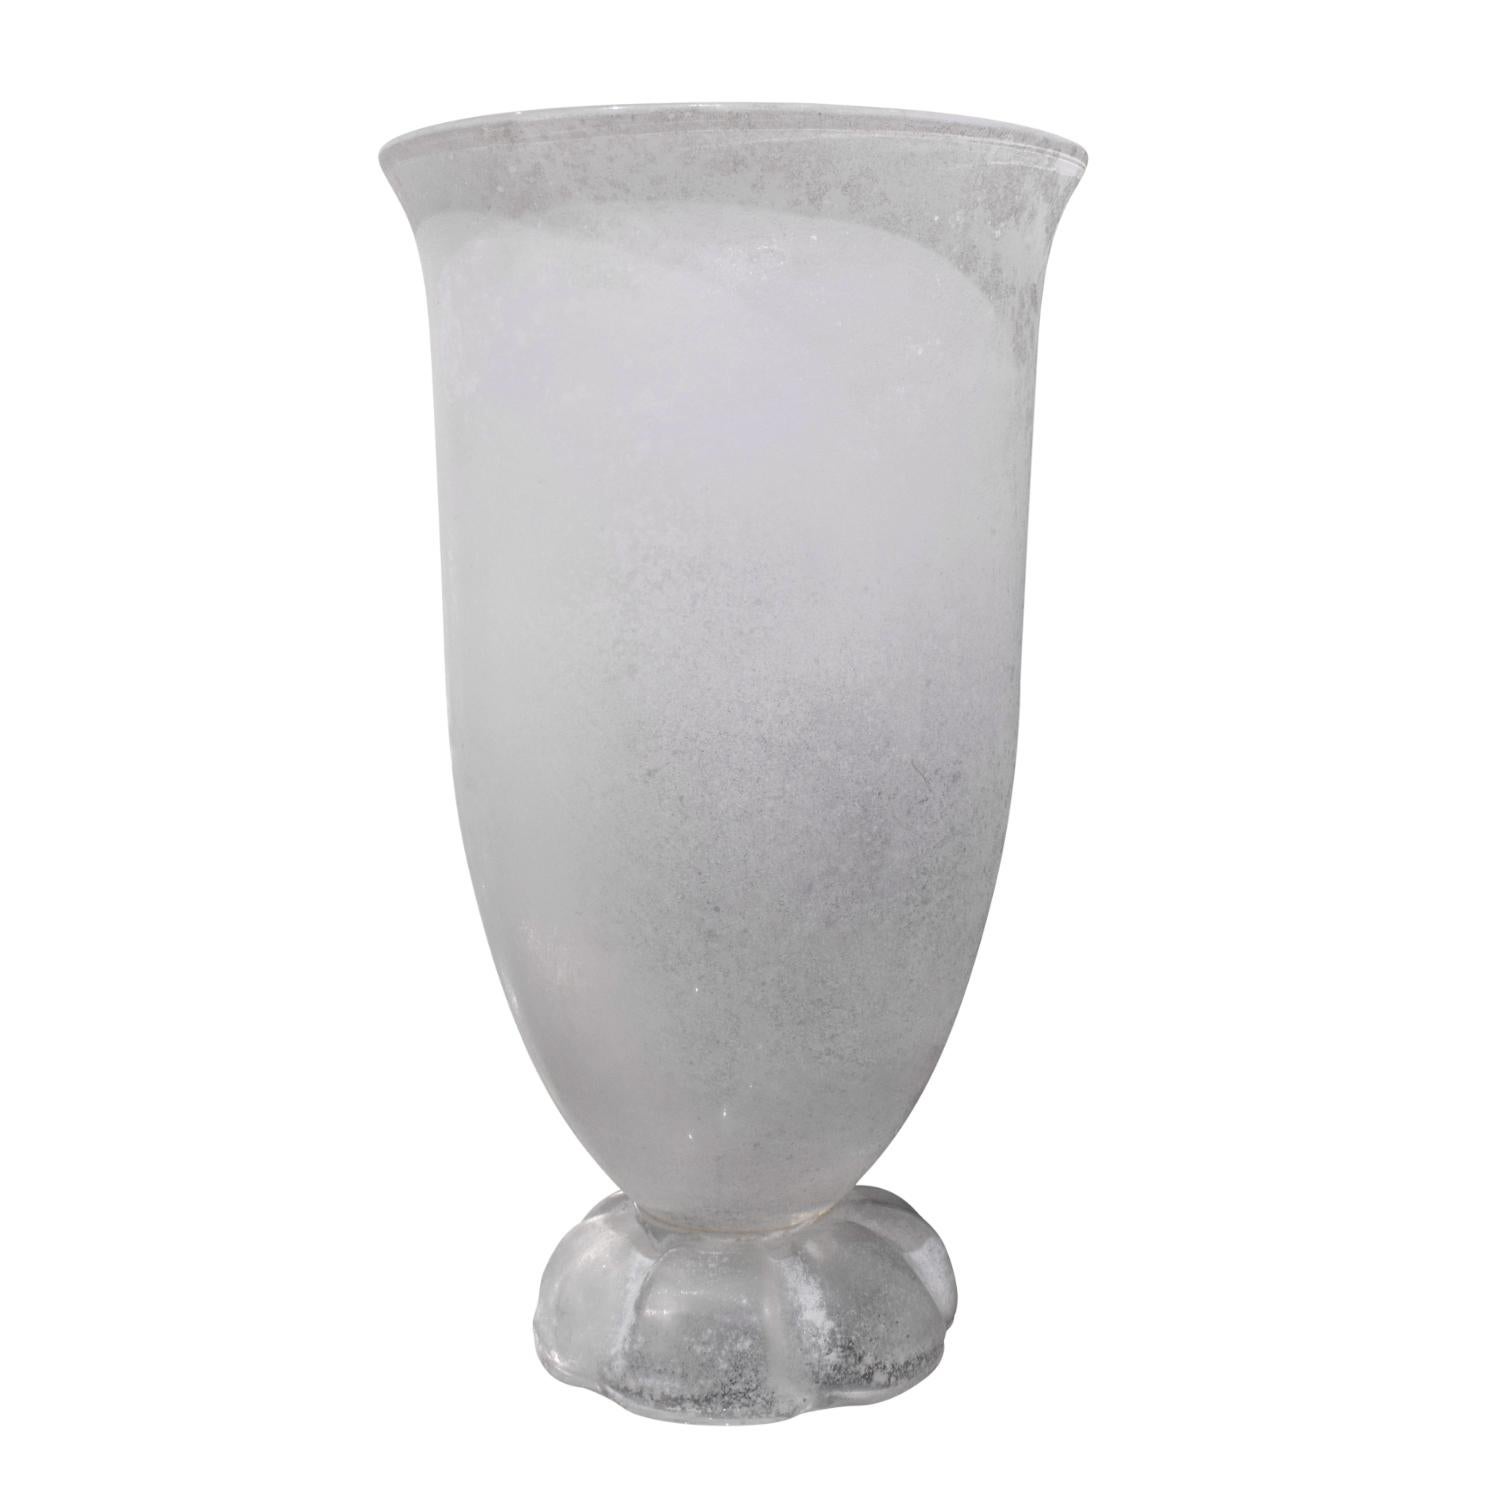 Large hand-blown glass urn / vase, white glass with scavo (rough) finish, by Seguso (Murano, Italy) for Karl Springer, American 1980's (signed on bottom “KARL SPRINGER”).

Reference: 
Karl Springer red binder catalog published in the 1980’s,